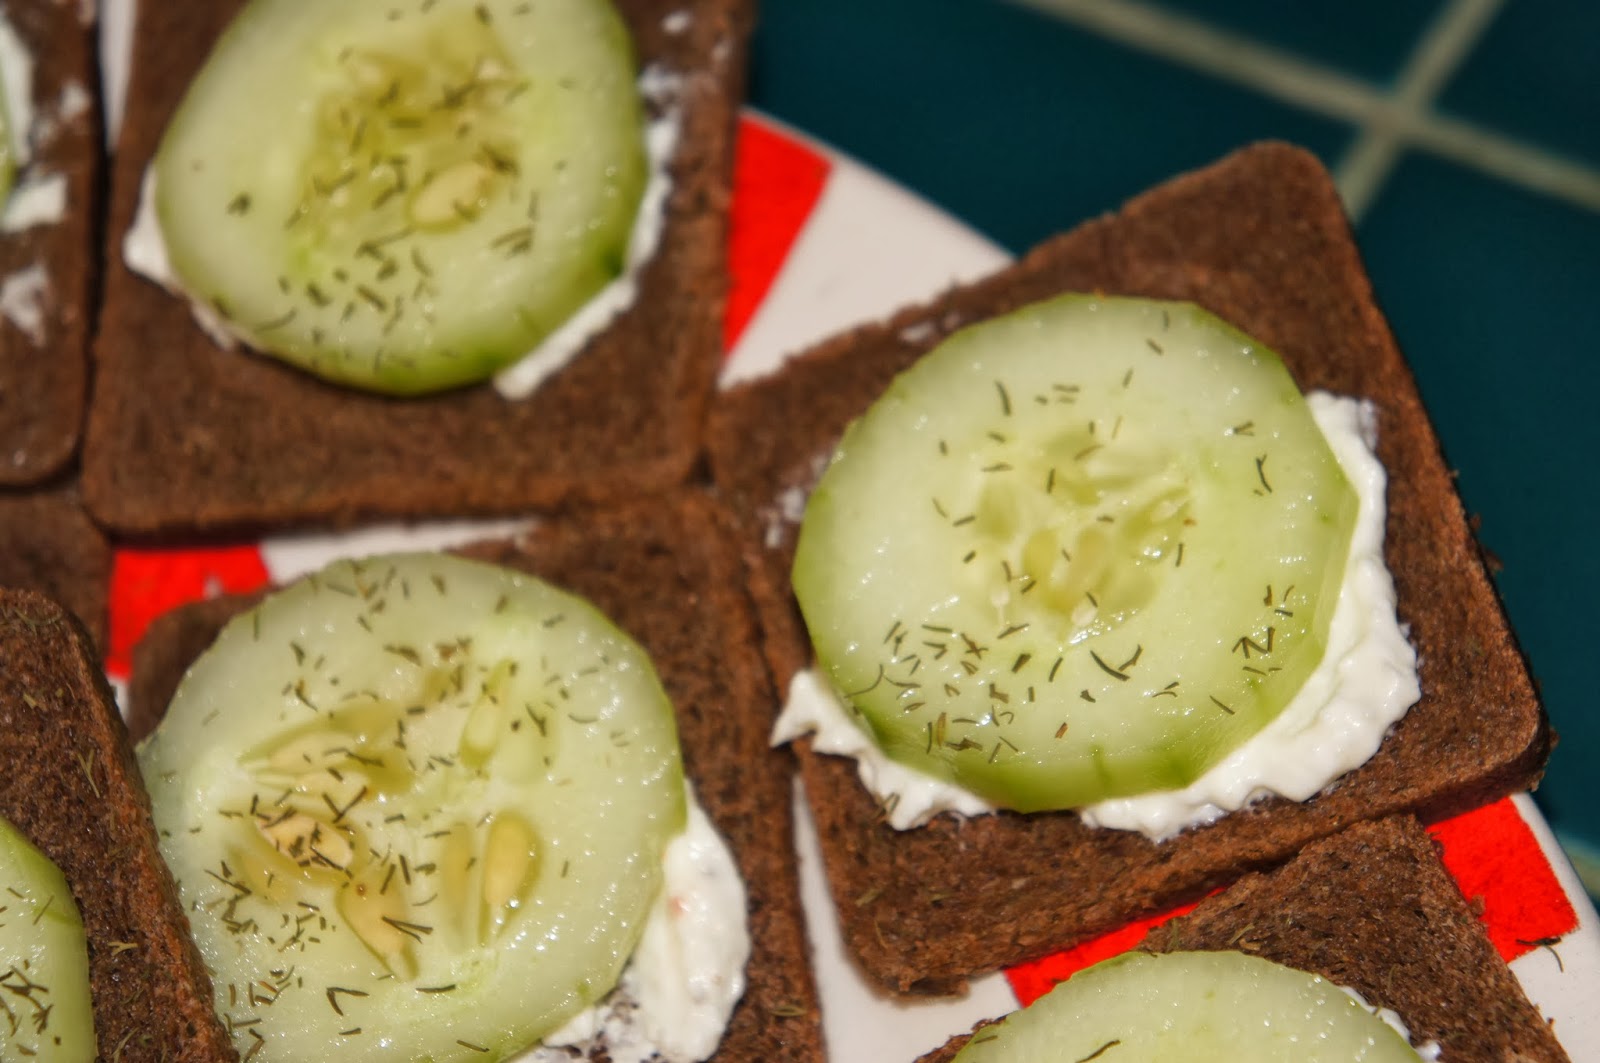 Just a Moment with Jan: Sue Zig's Cucumber Appetizer